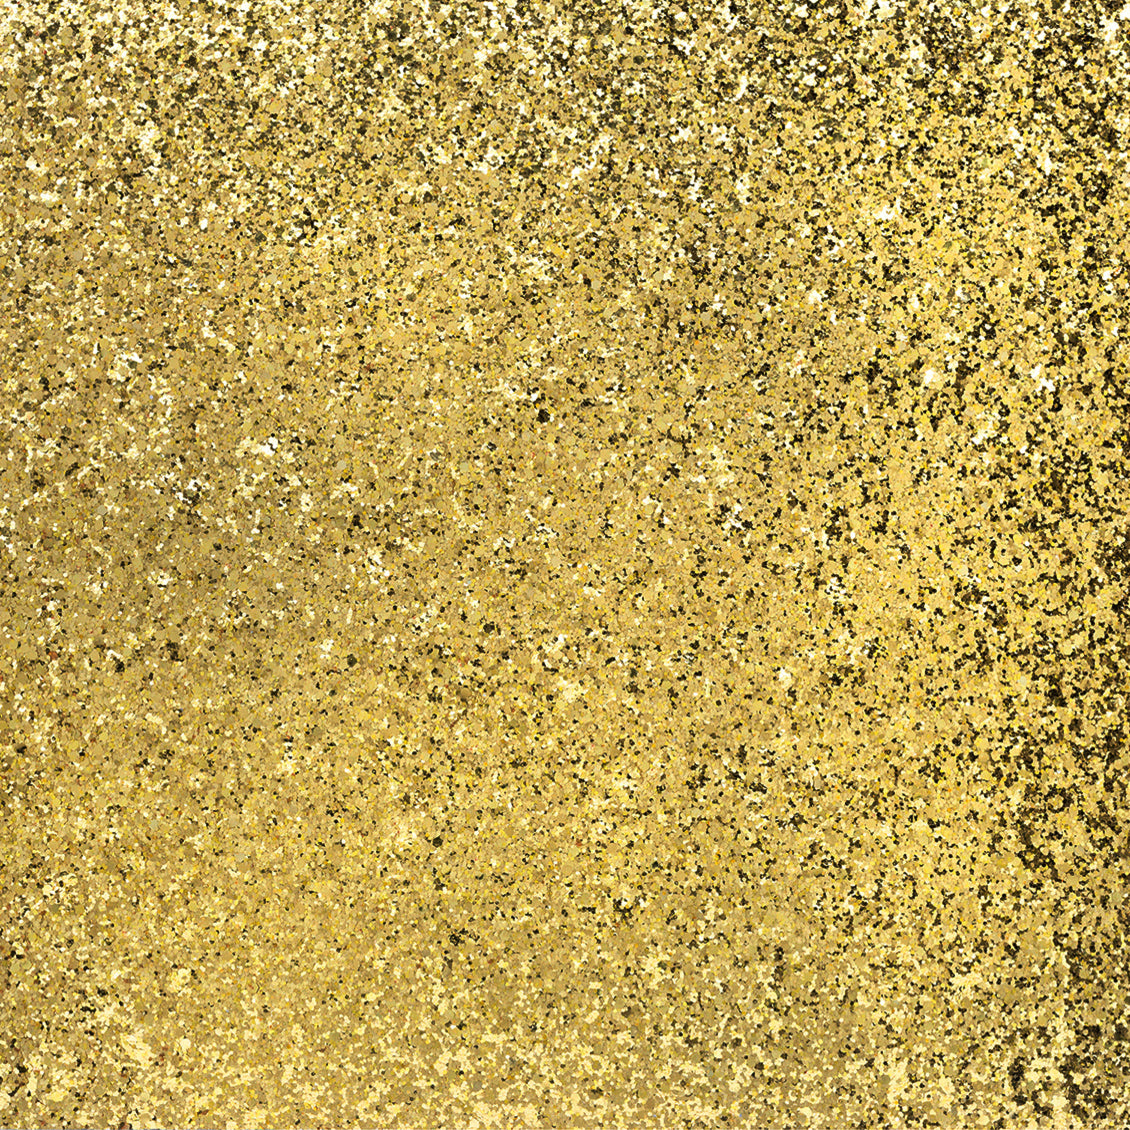 Best Creation Glitter Cardstock 12X12 - Dark Gold - Glitter Cardstock  12X12 - Dark Gold . shop for Best Creation products in India.